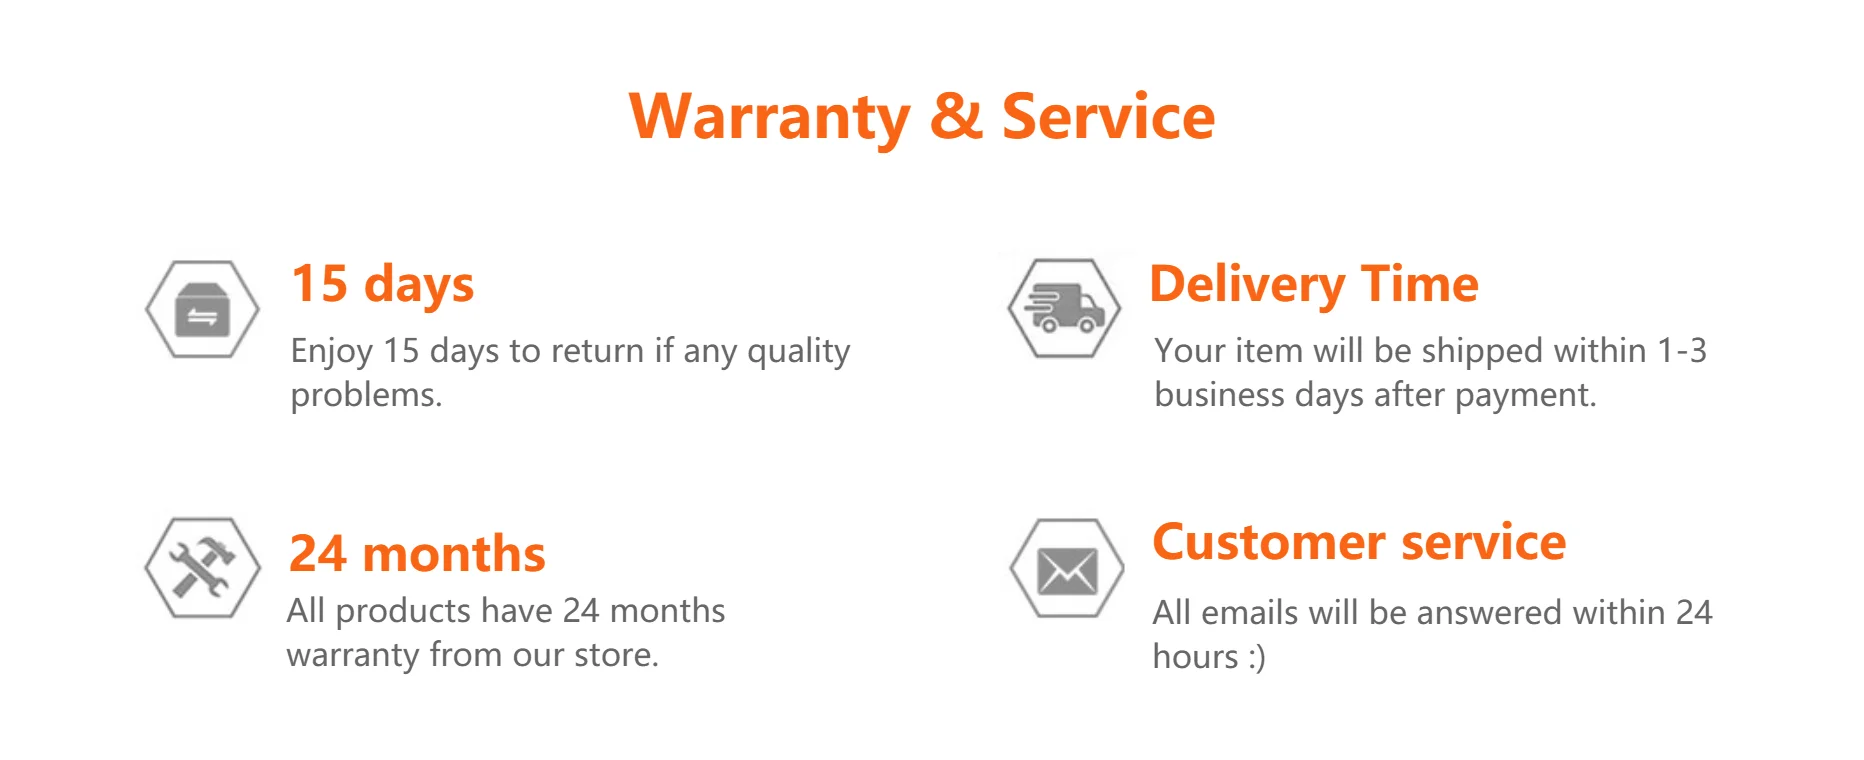 Reliable shipping, 15-day returns, and 24-month warranties for worry-free purchases.